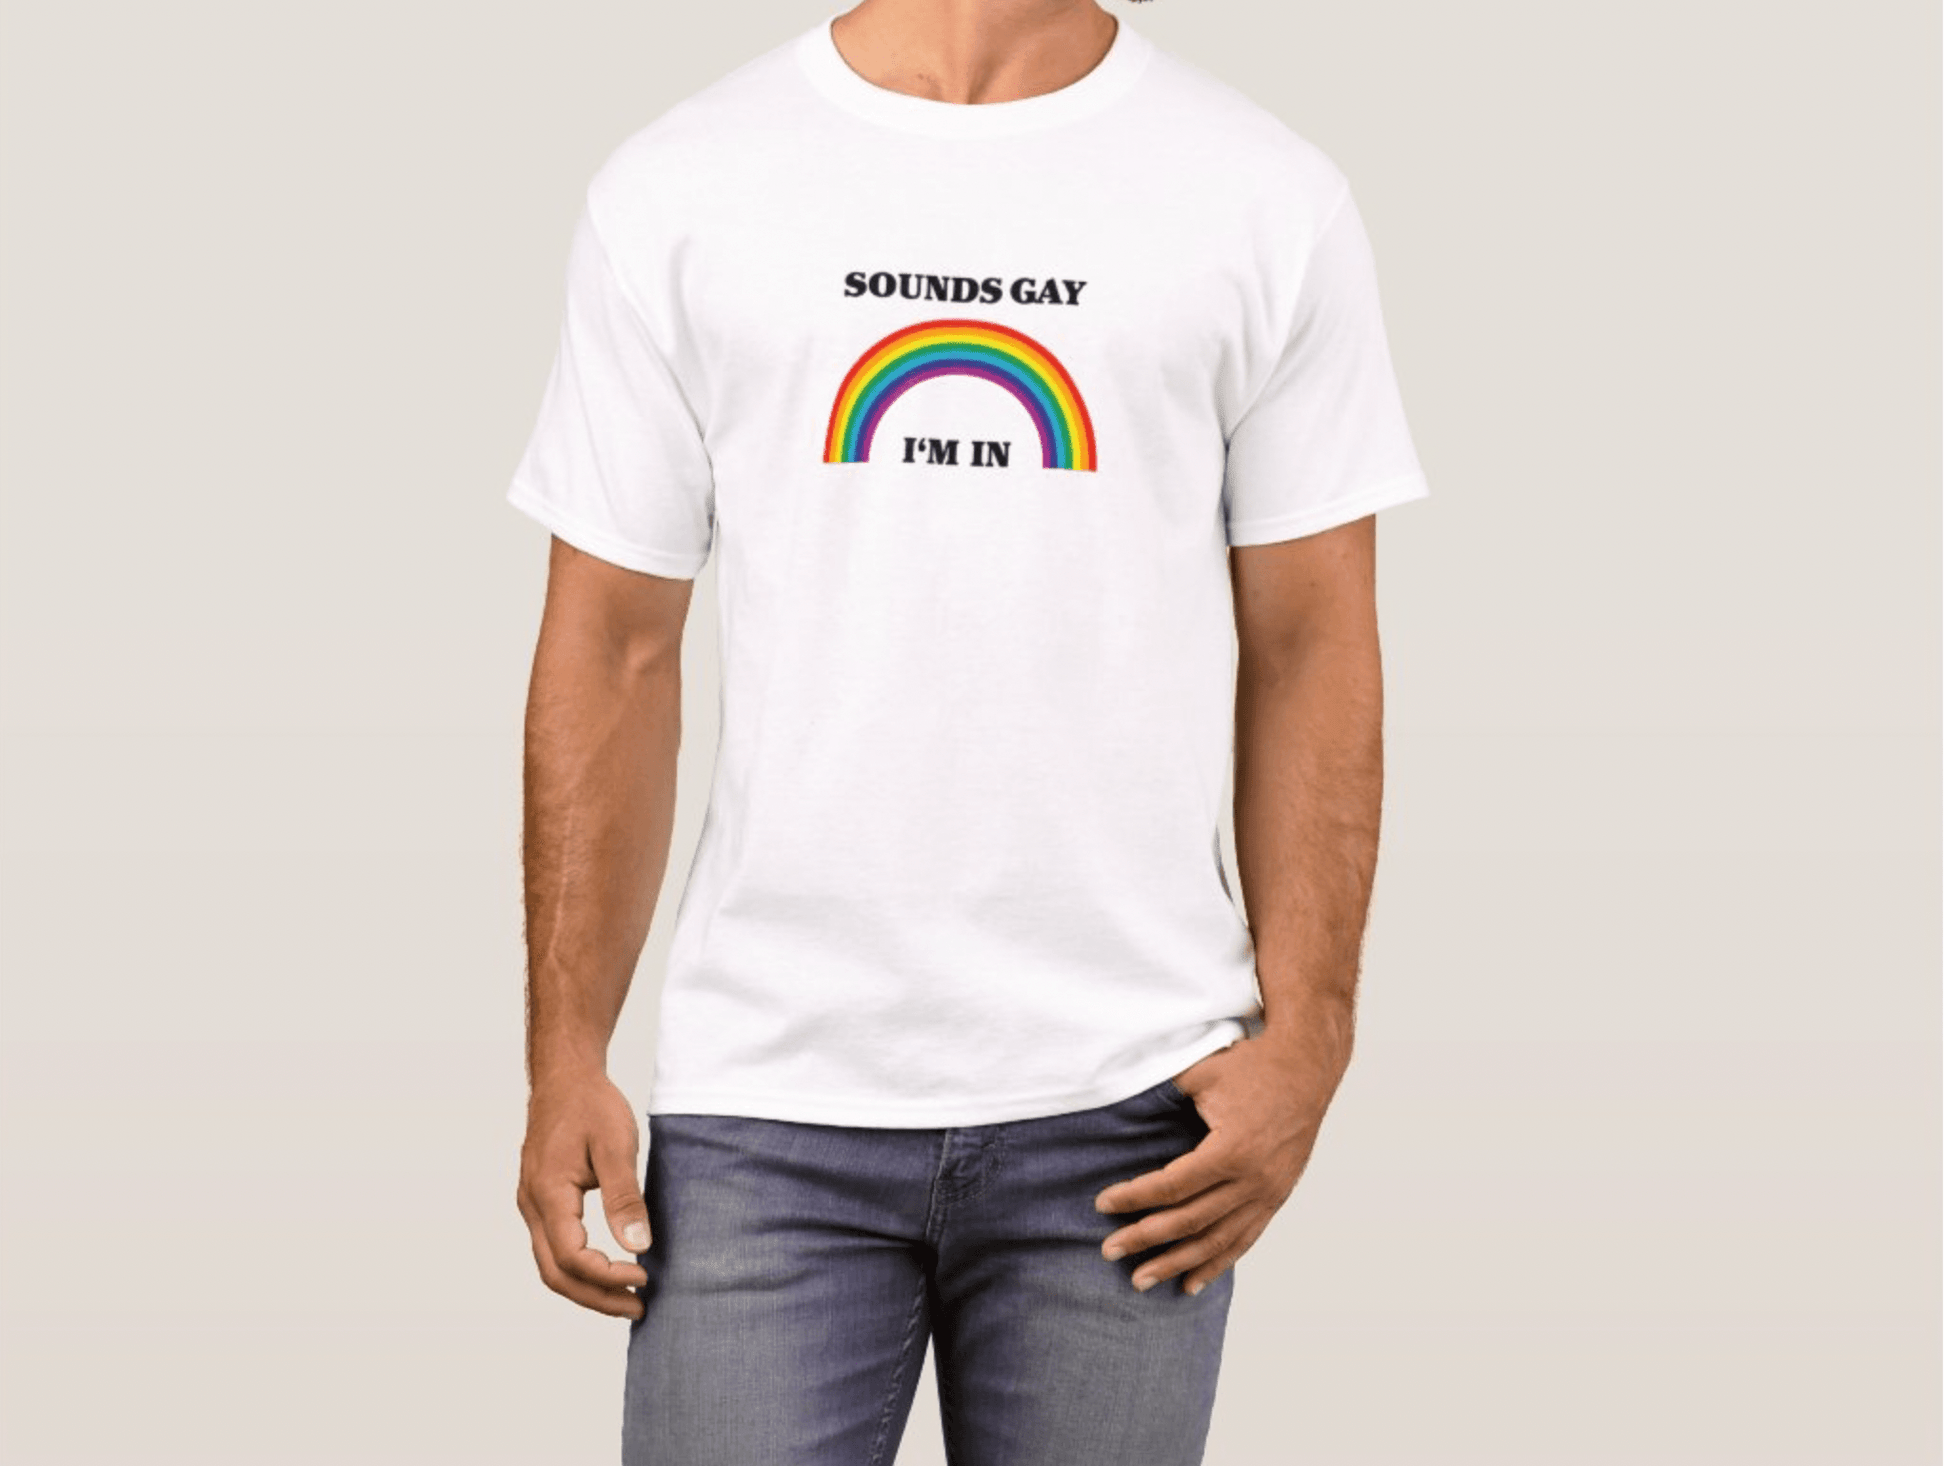 'Sounds Gay I'm In' Shirt - Gays+ Store